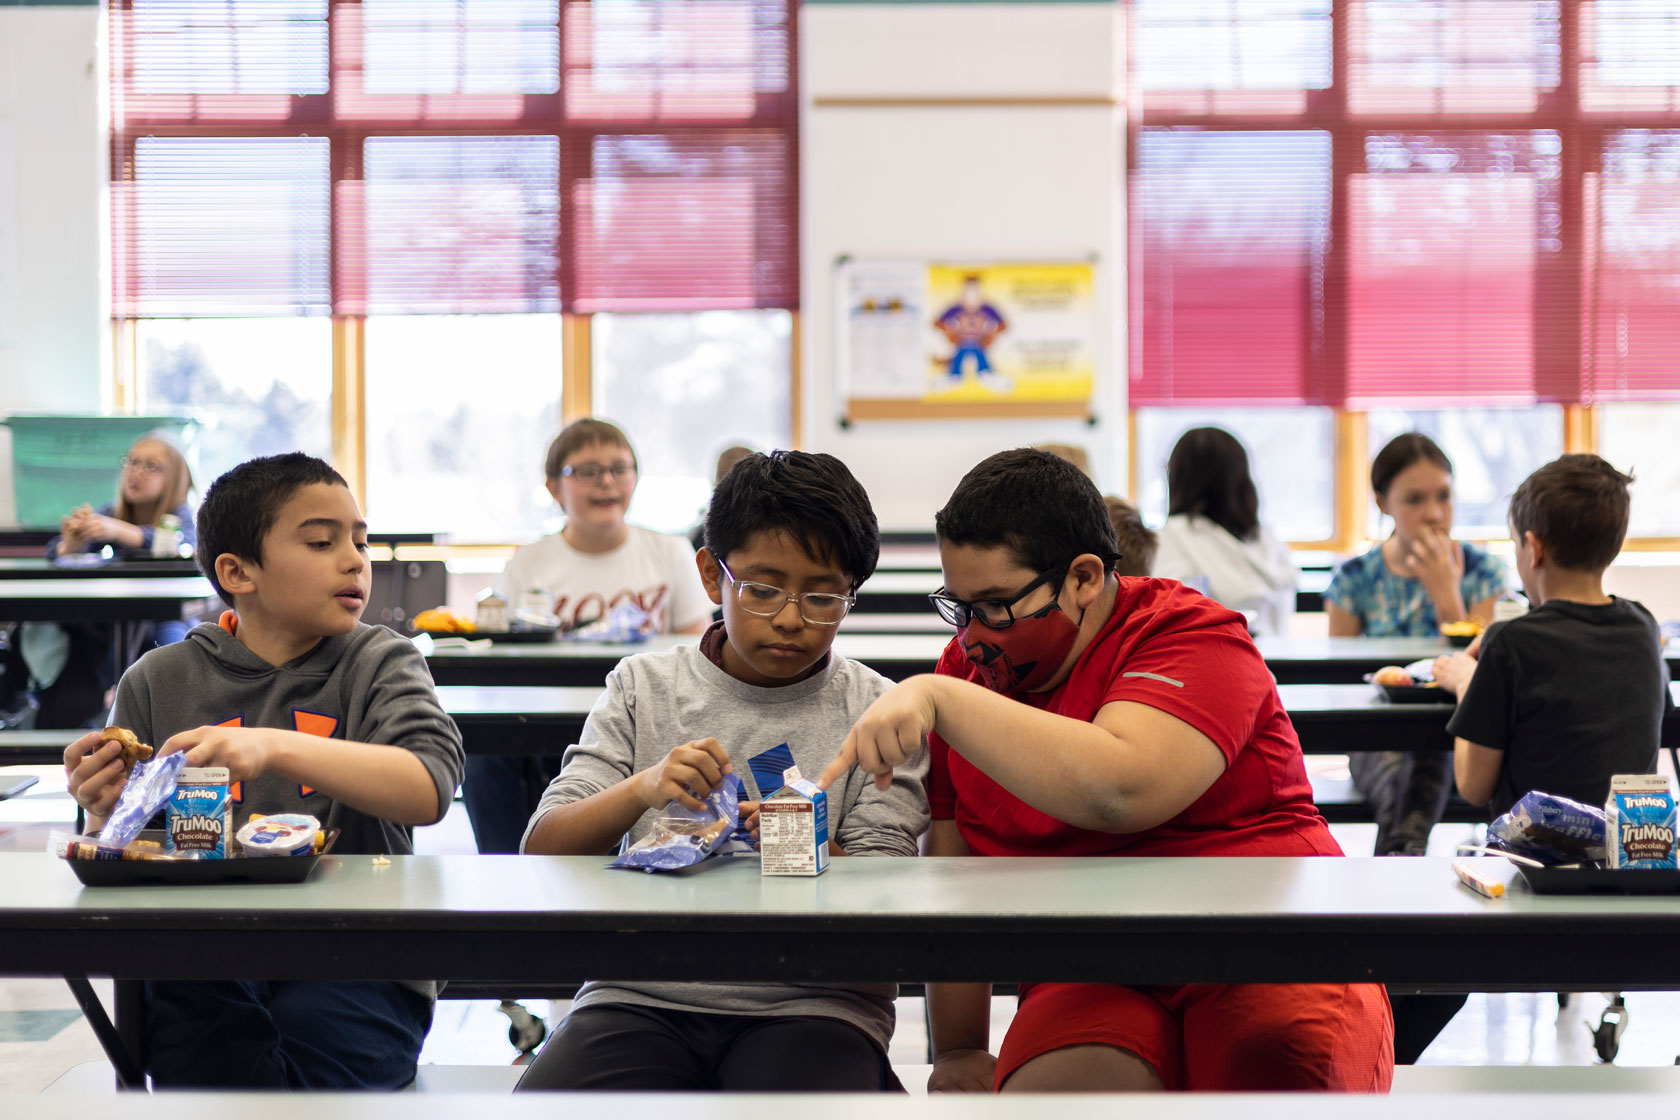 Three elementary students sit and compare lunches at a cafeteria table.